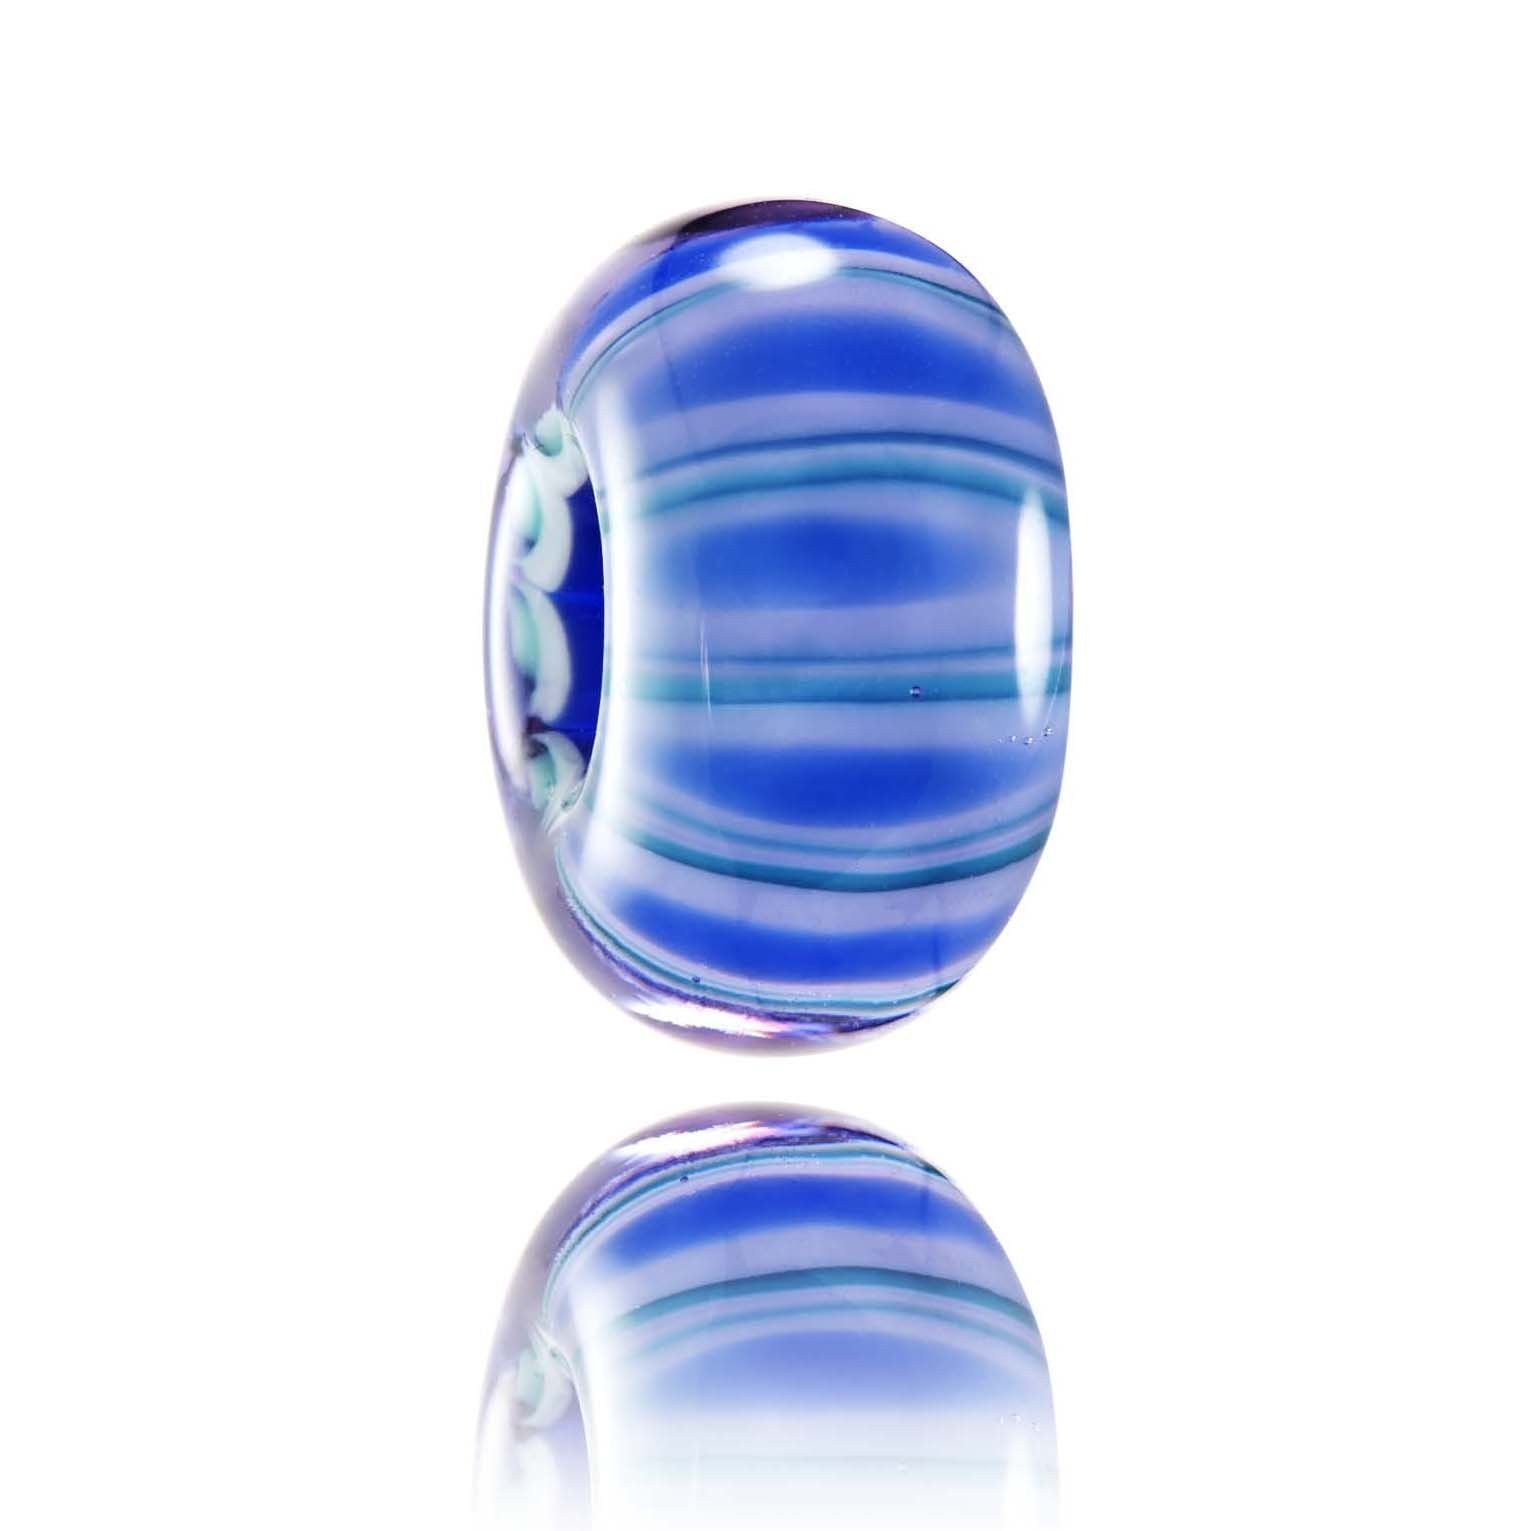 Stripy blue and purple Murano glass bead inspired by the surf beach at Anglet in France.